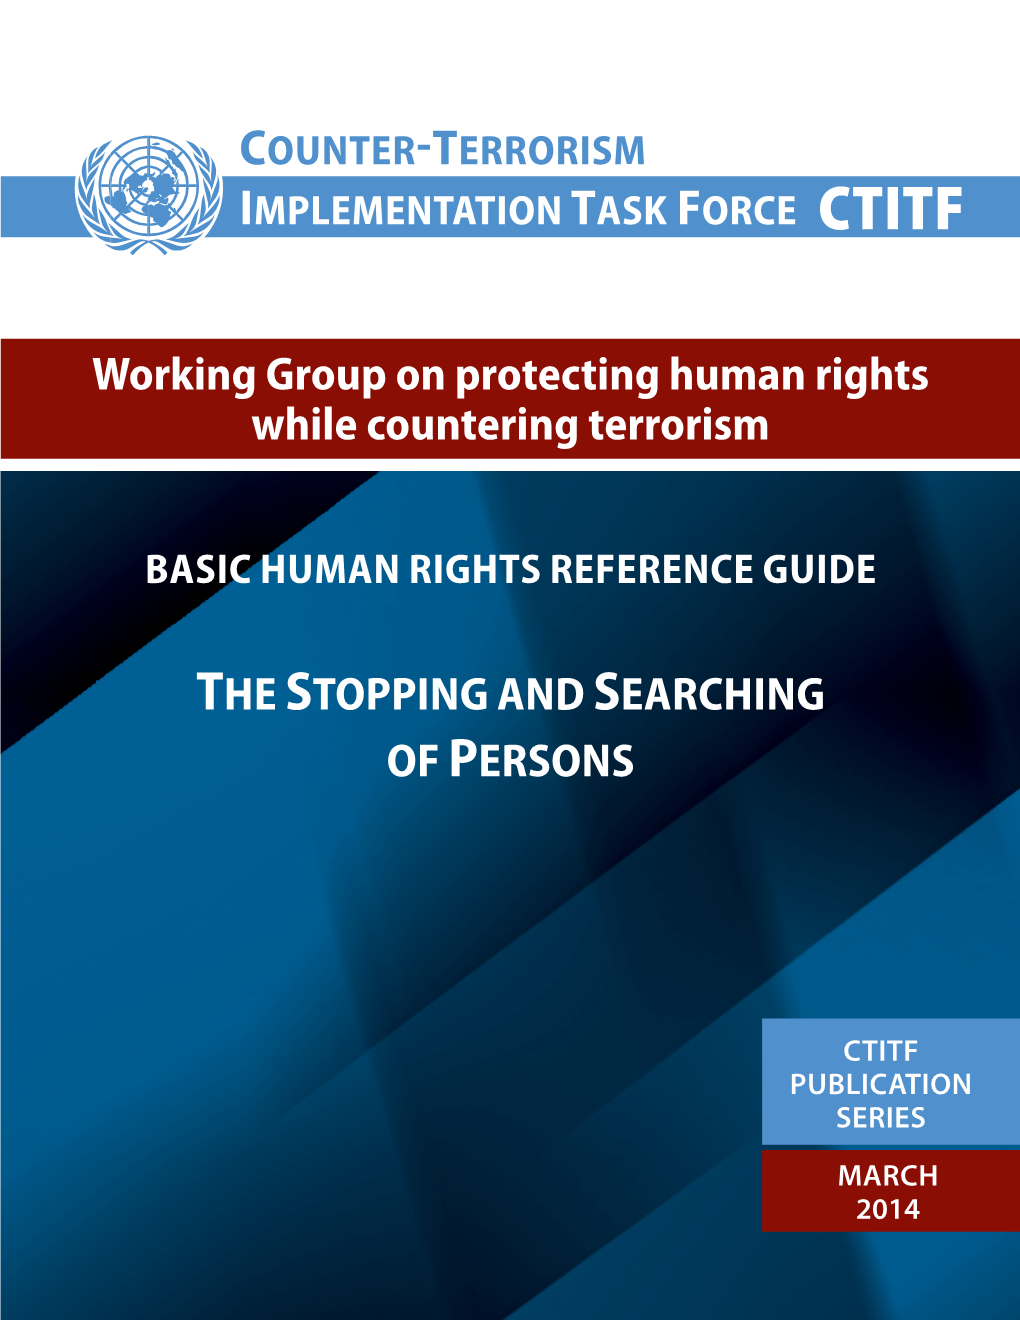 Working Group on Protecting Human Rights While Countering Terrorism